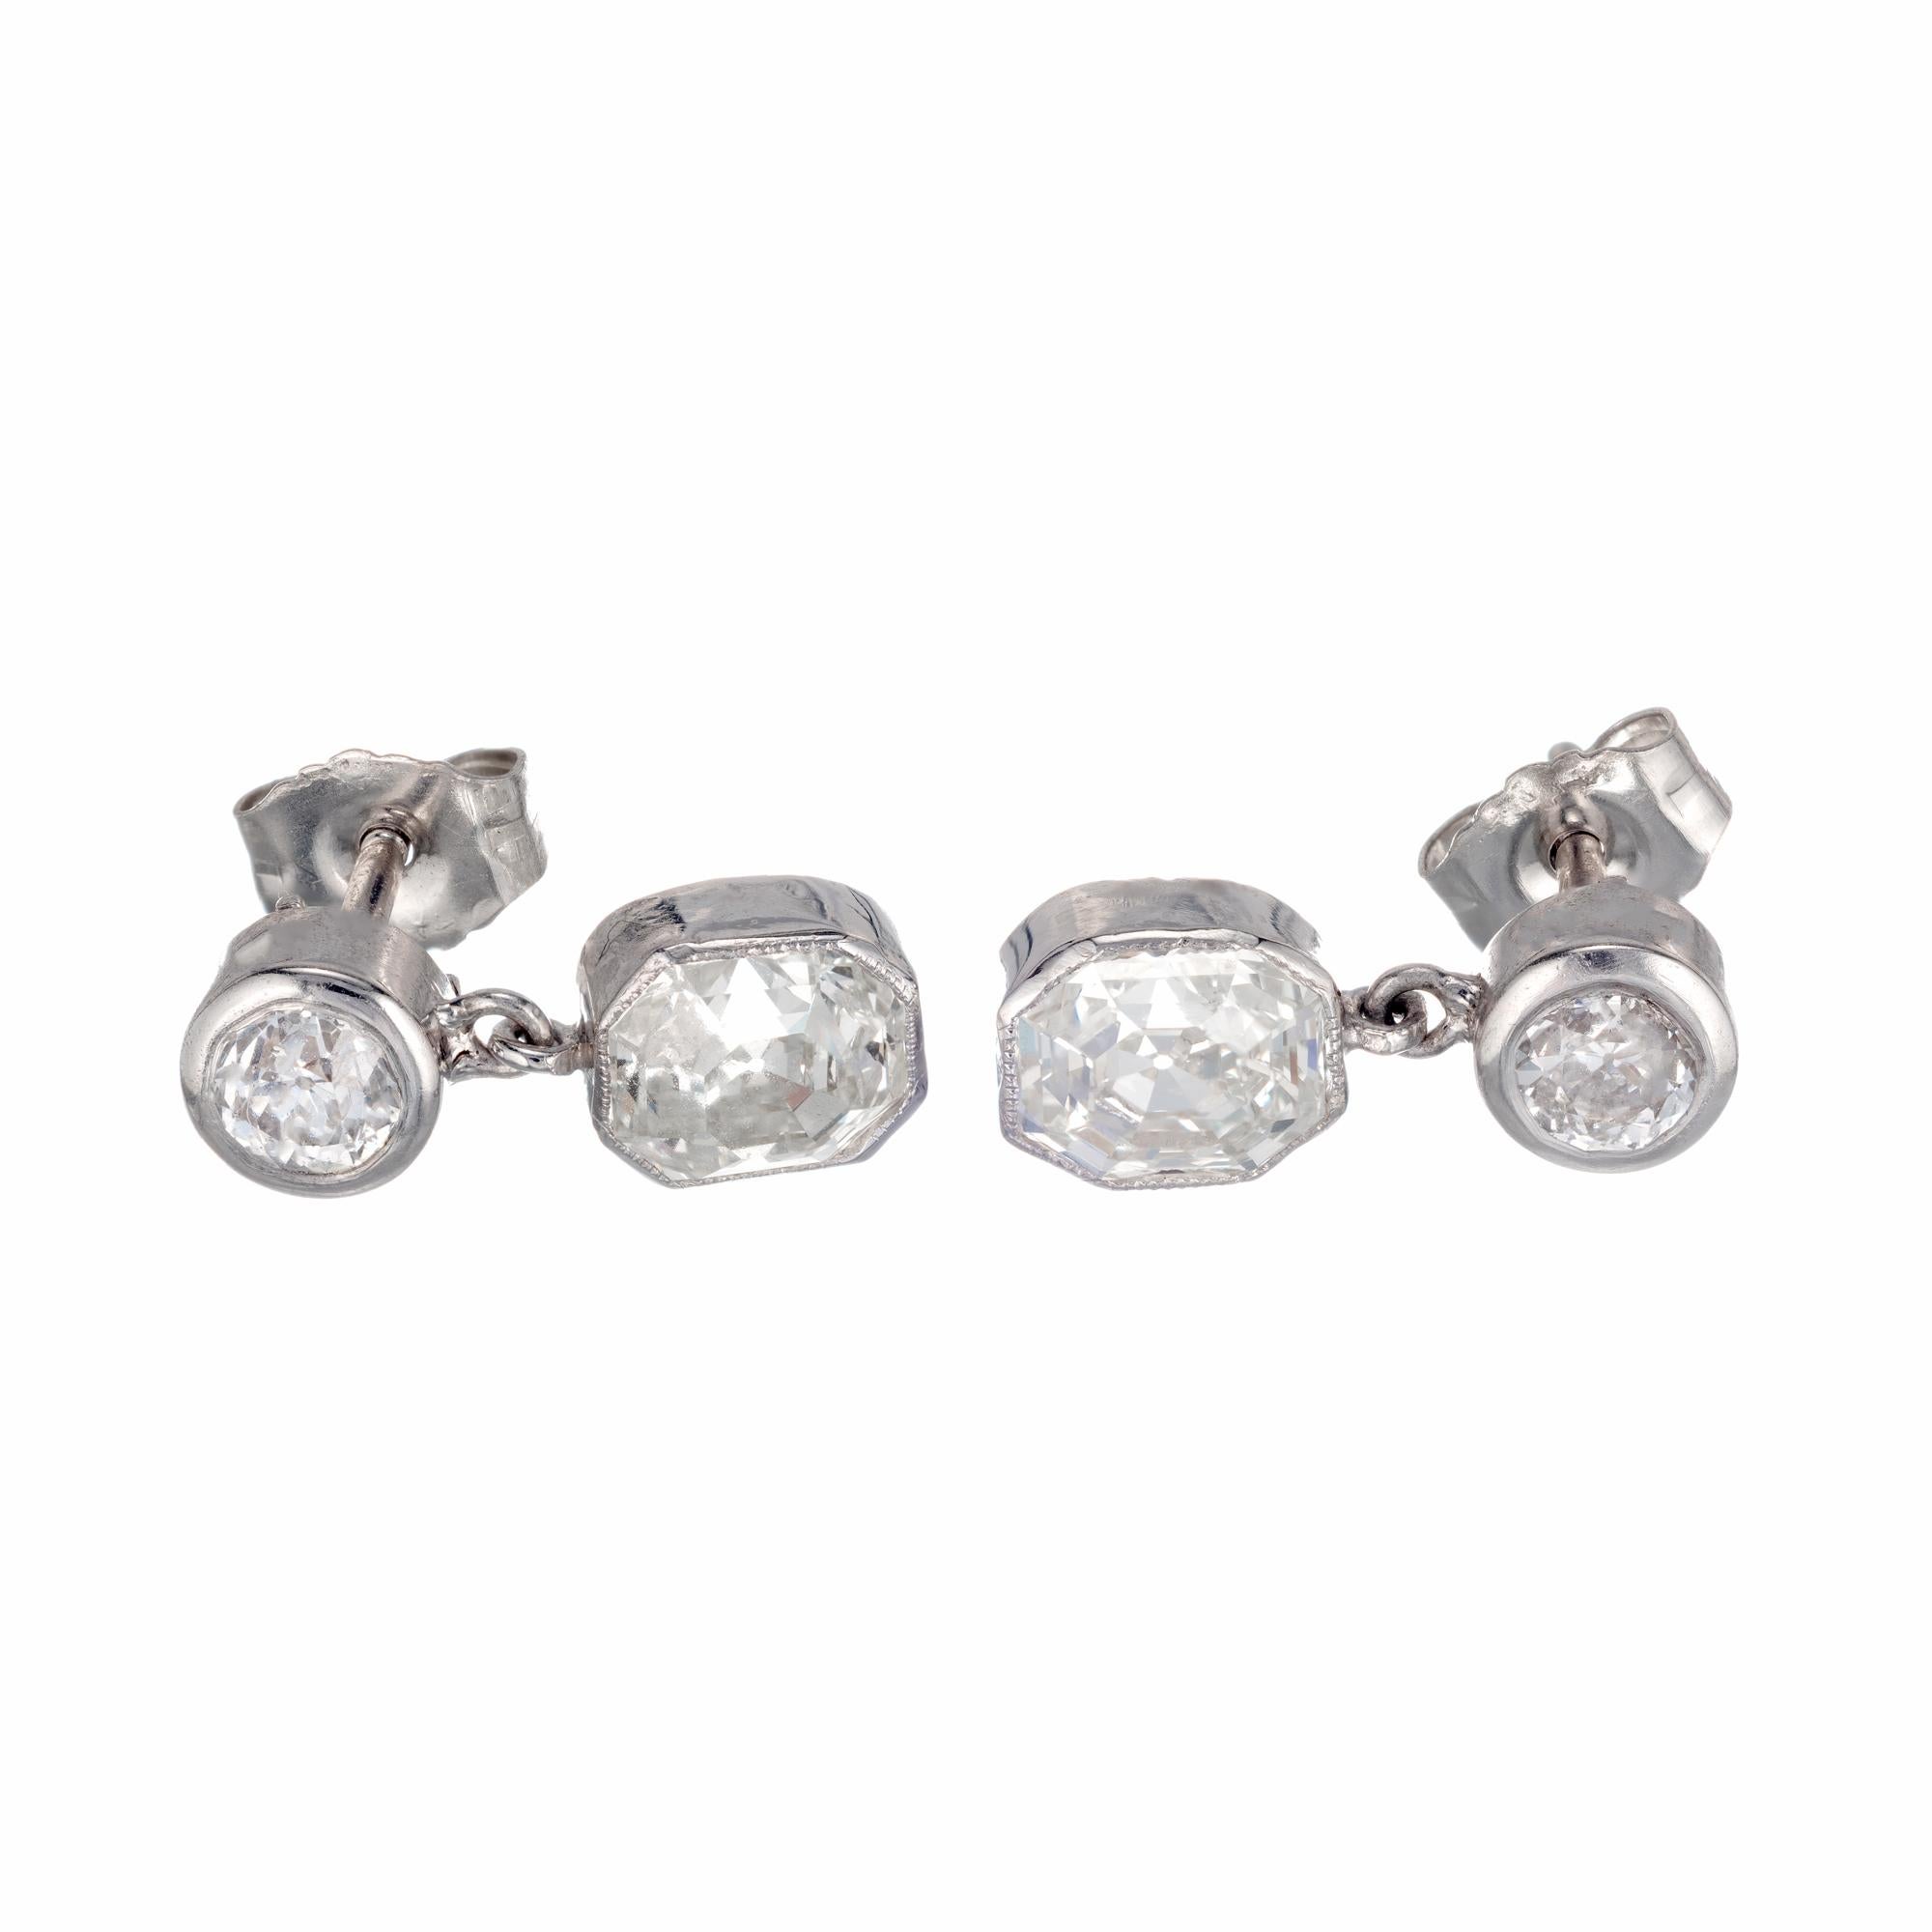 Eight-sided step cut diamond dangle earrings. The bottoms are GIA certified octagonal step cut diamonds circa 1915-1920 with sparkle and a hint of warm color face up. The tops are old euro cut diamonds, also circa 1915-1920. set in platinum and